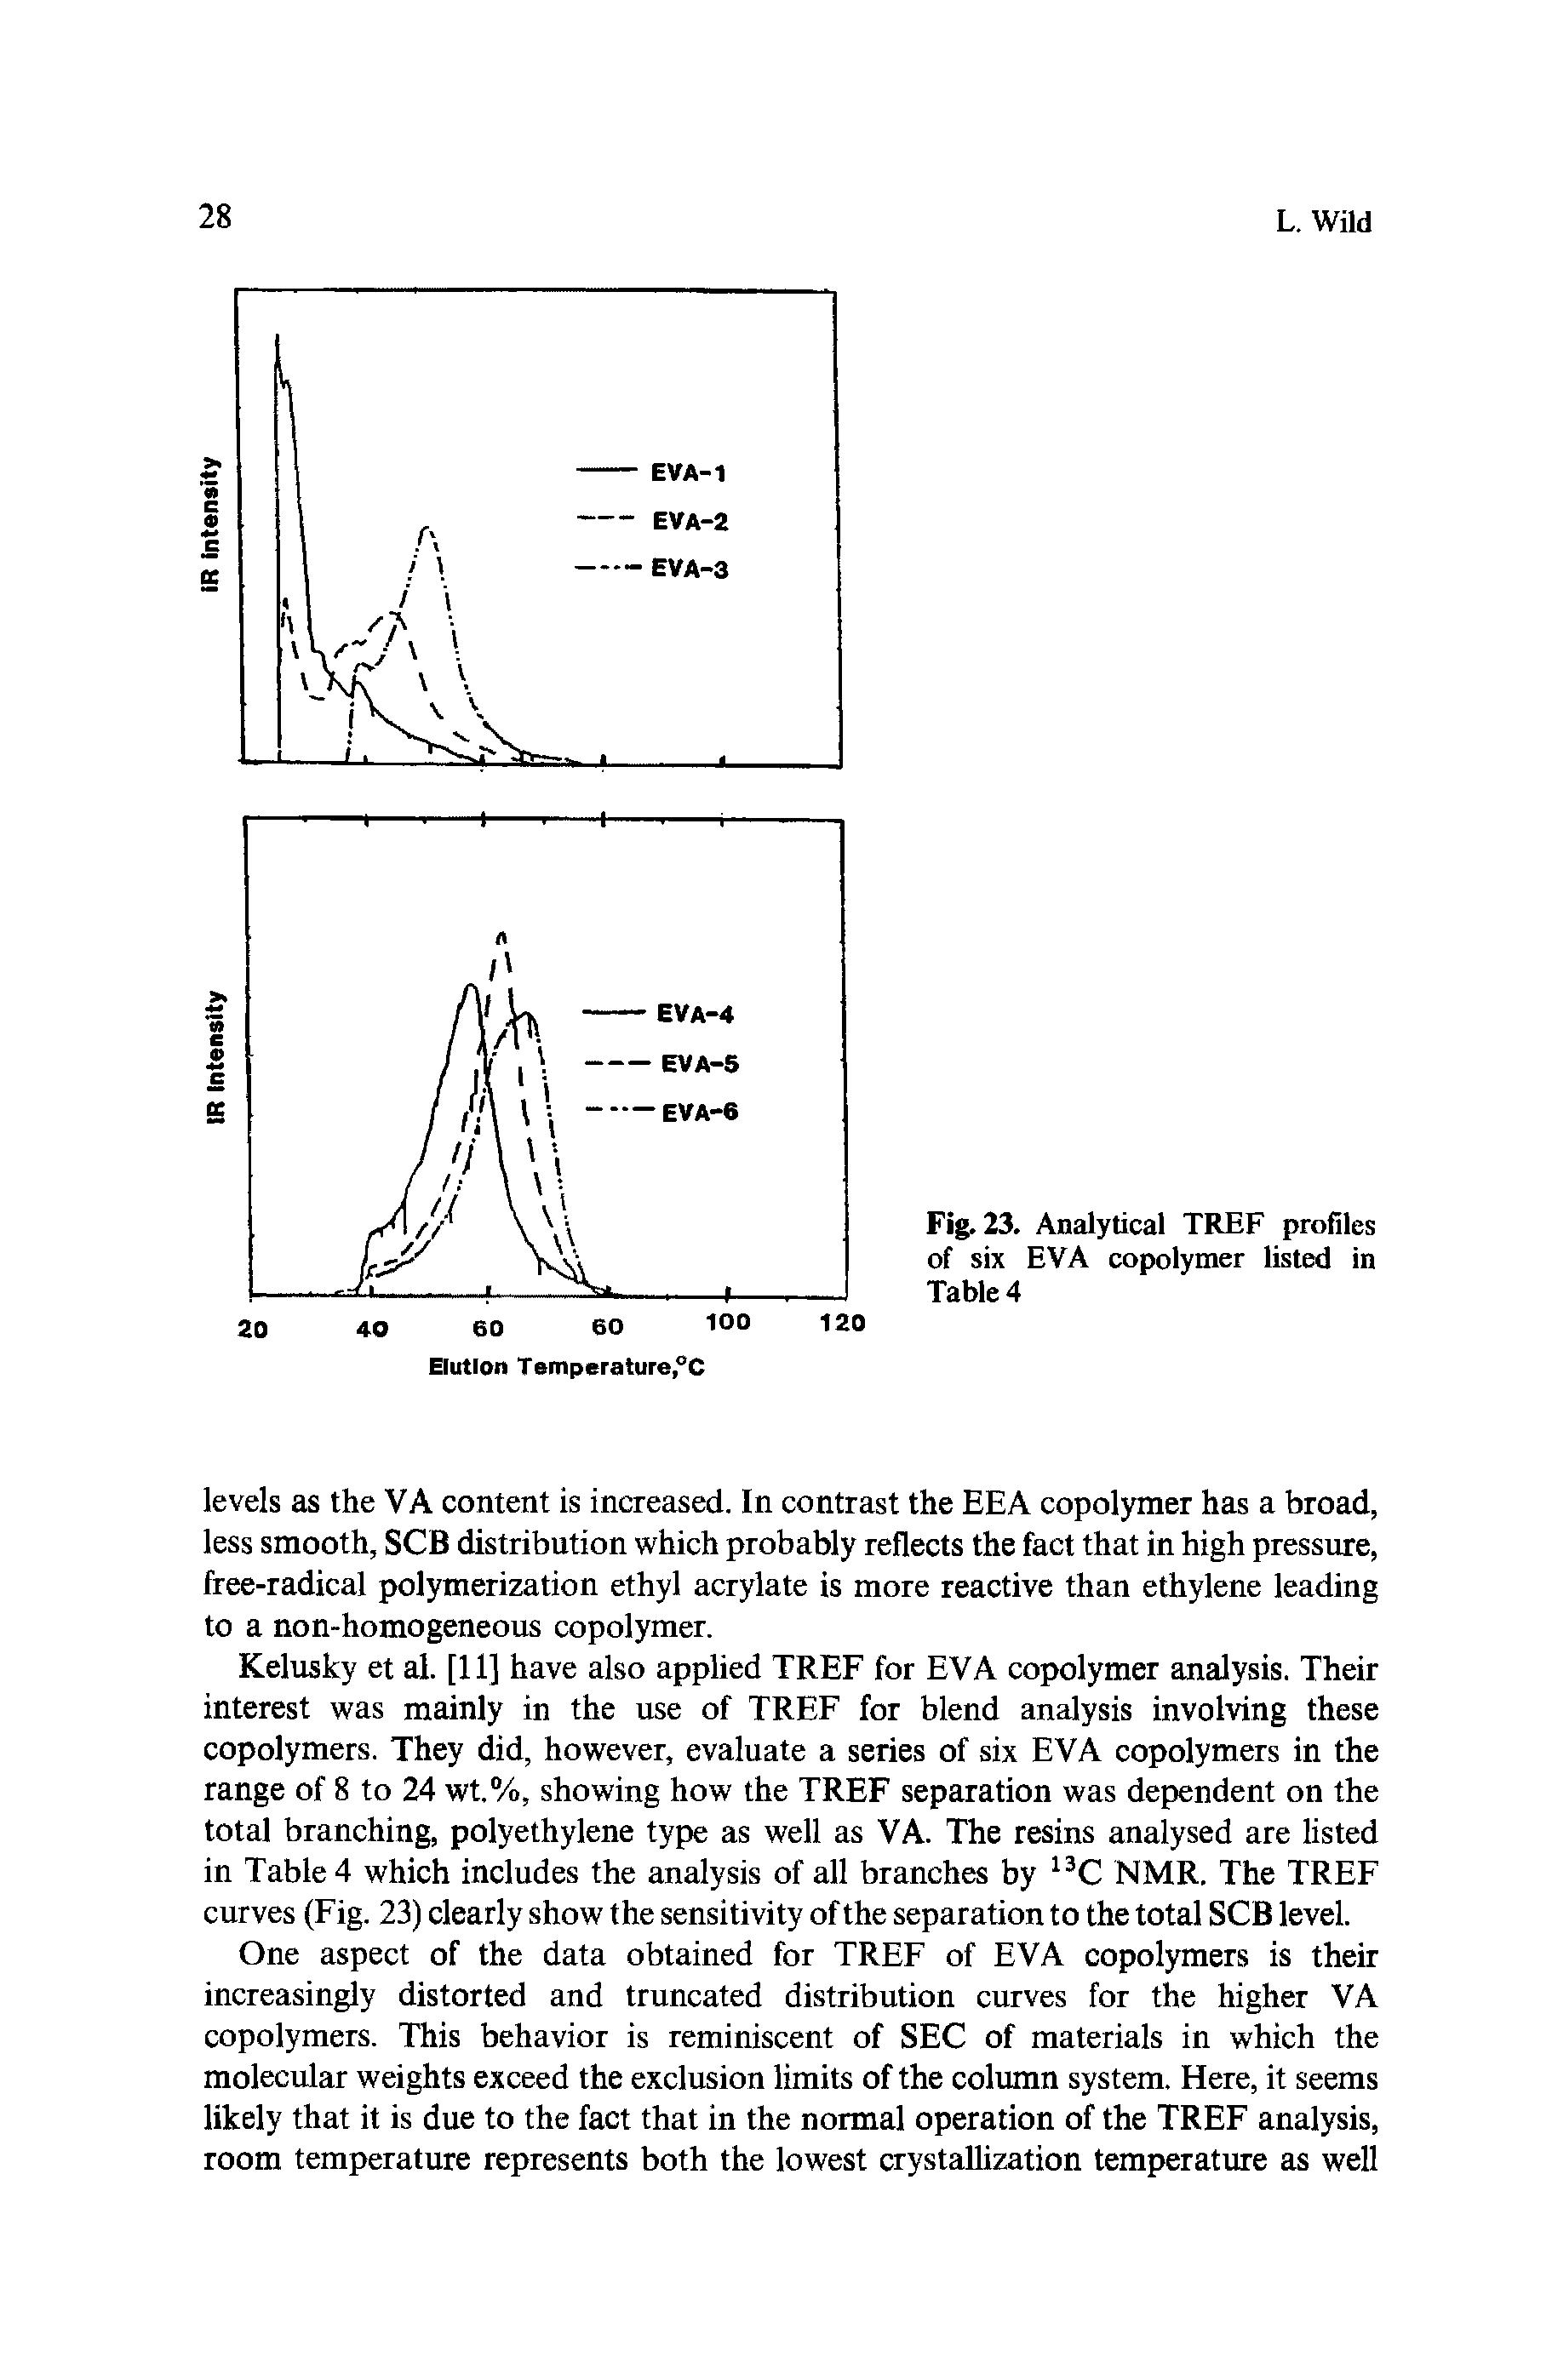 Fig. 23. Analytical TREF profiles of six EVA copolymer listed in Table 4...